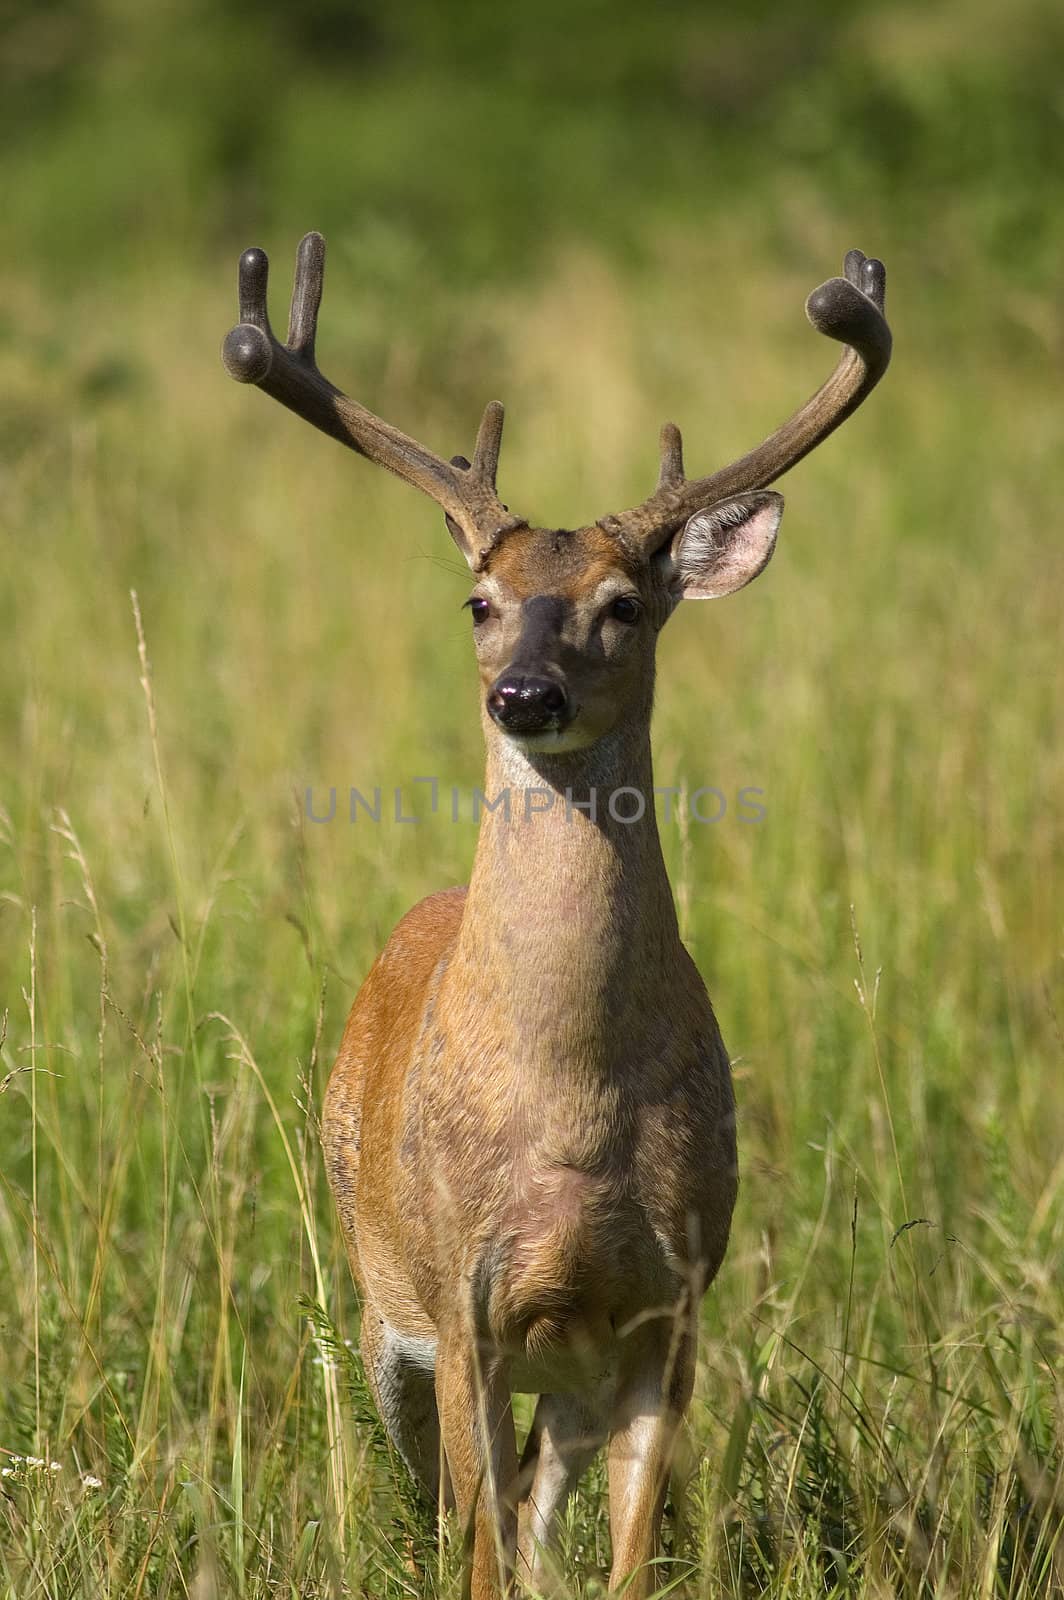 Portrait of a White Tailed Deer in a field at the edge of a forest